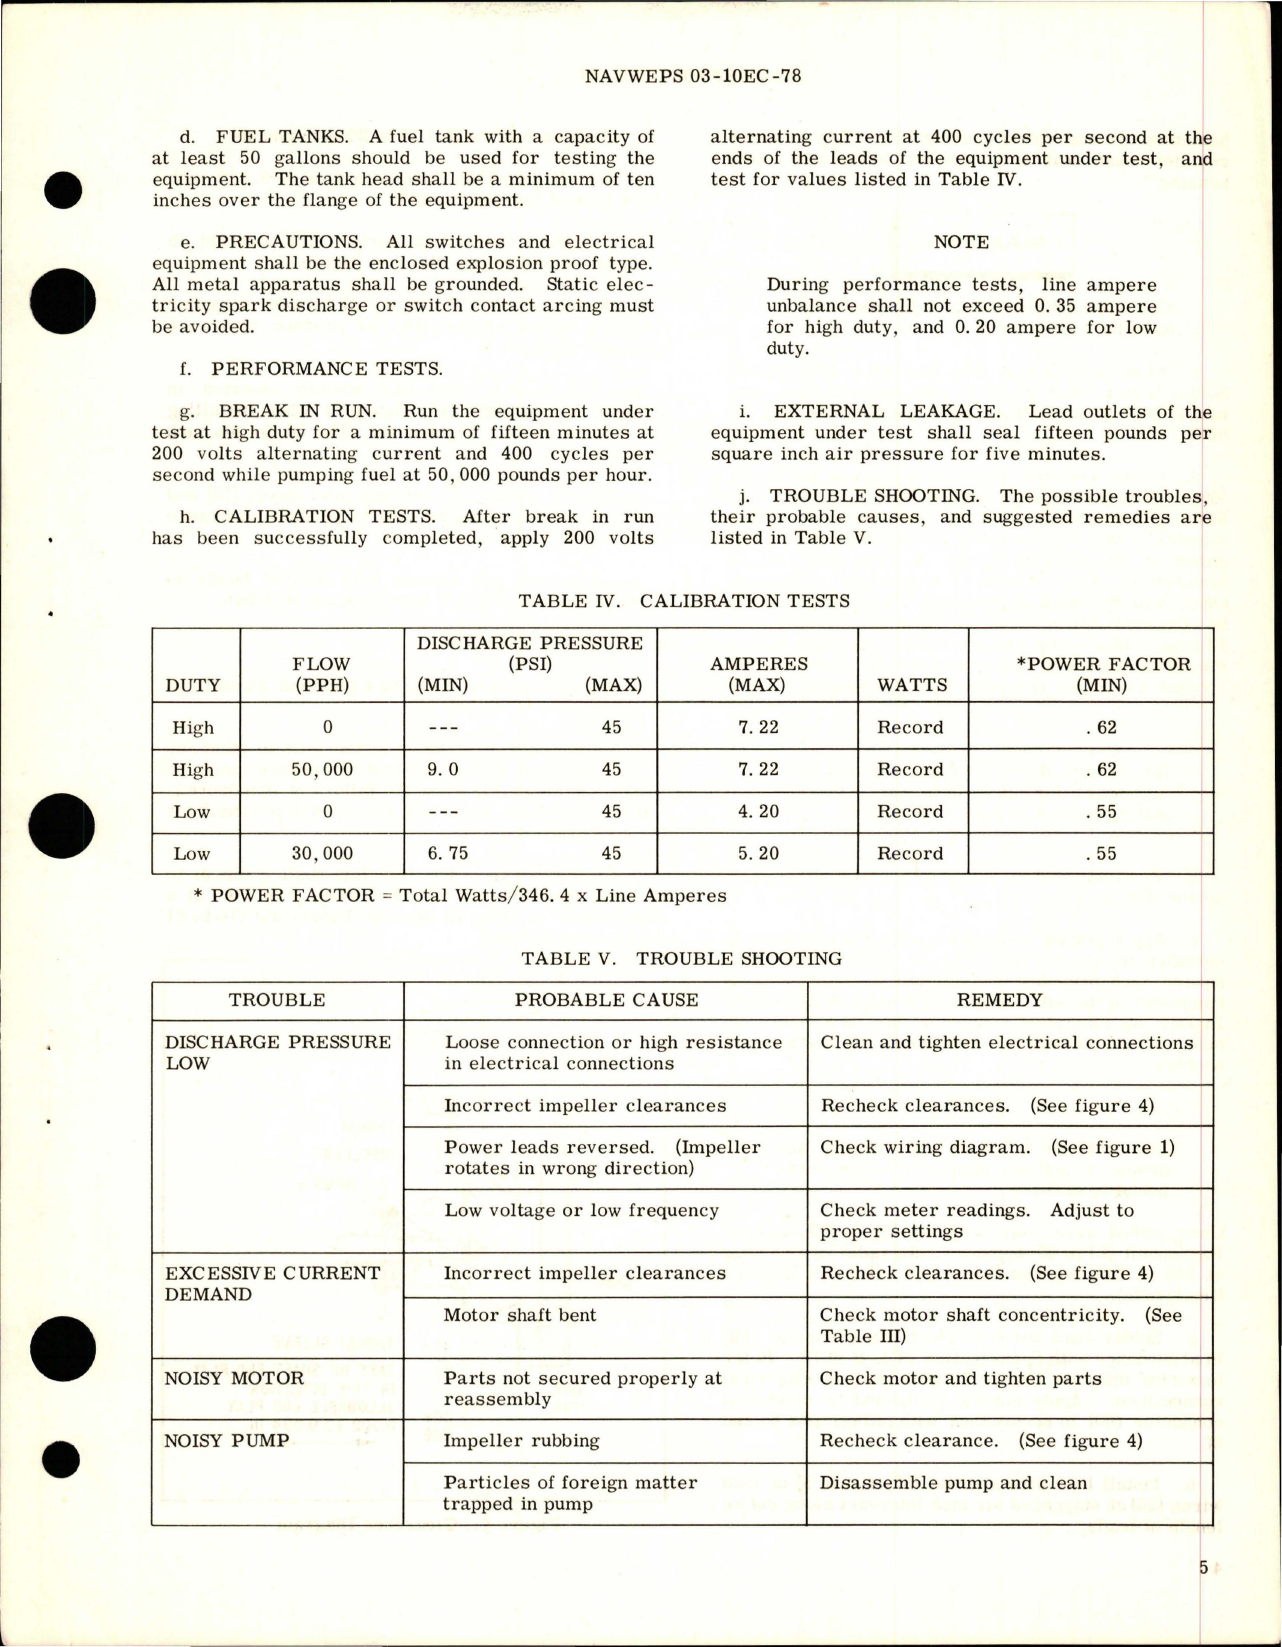 Sample page 7 from AirCorps Library document: Overhaul Instructions with Parts for Submerged Booster Pump - Model TB139000-1